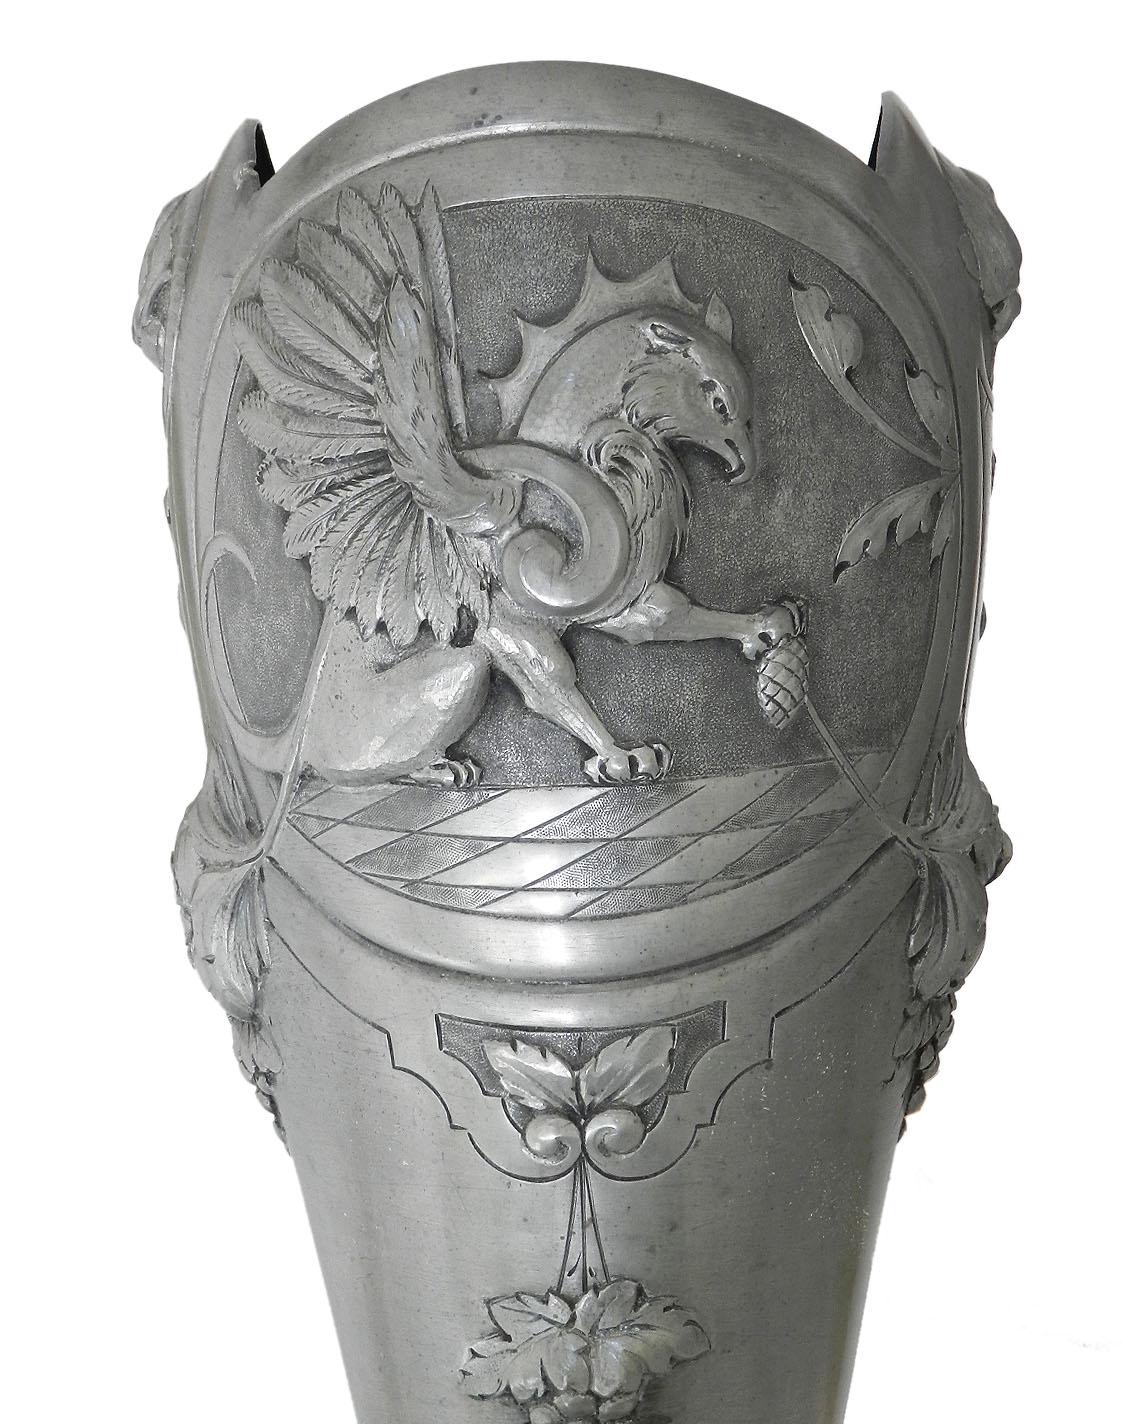 Exceptional Art Nouveau vase Pewter signed A Villien, circa 1890-1910 tall and impressive
Stunning with Phoenix and Lion heads
Very good antique patina, this vase could be polished if preferred
Impressive with minor signs of age and wear and very